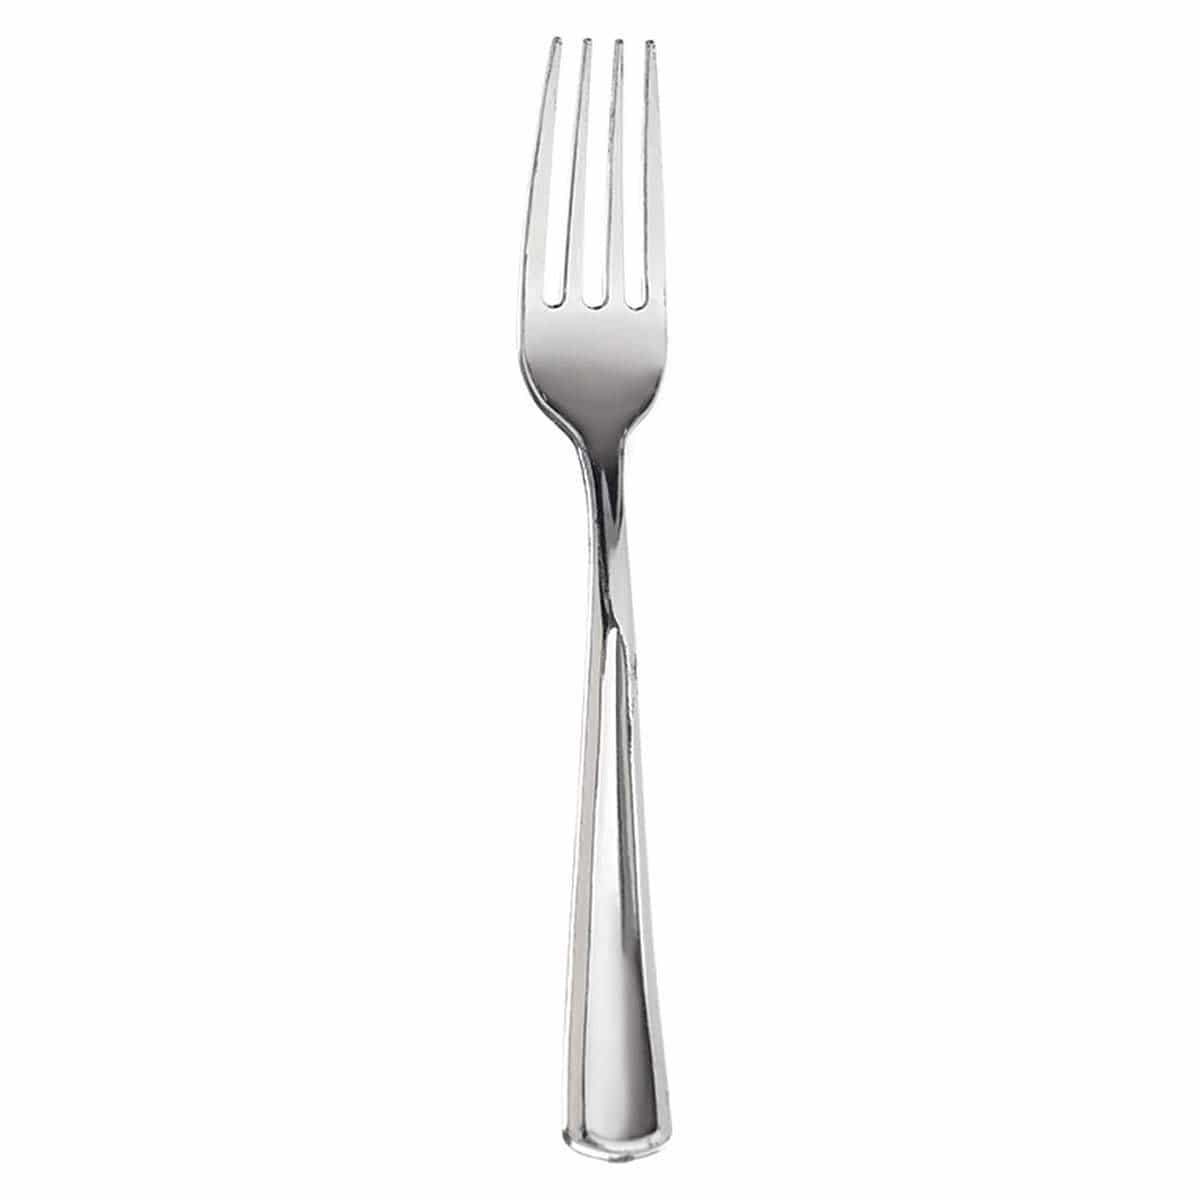 Buy Plasticware Premium Forks Stainless - Sil 32/pkg. sold at Party Expert